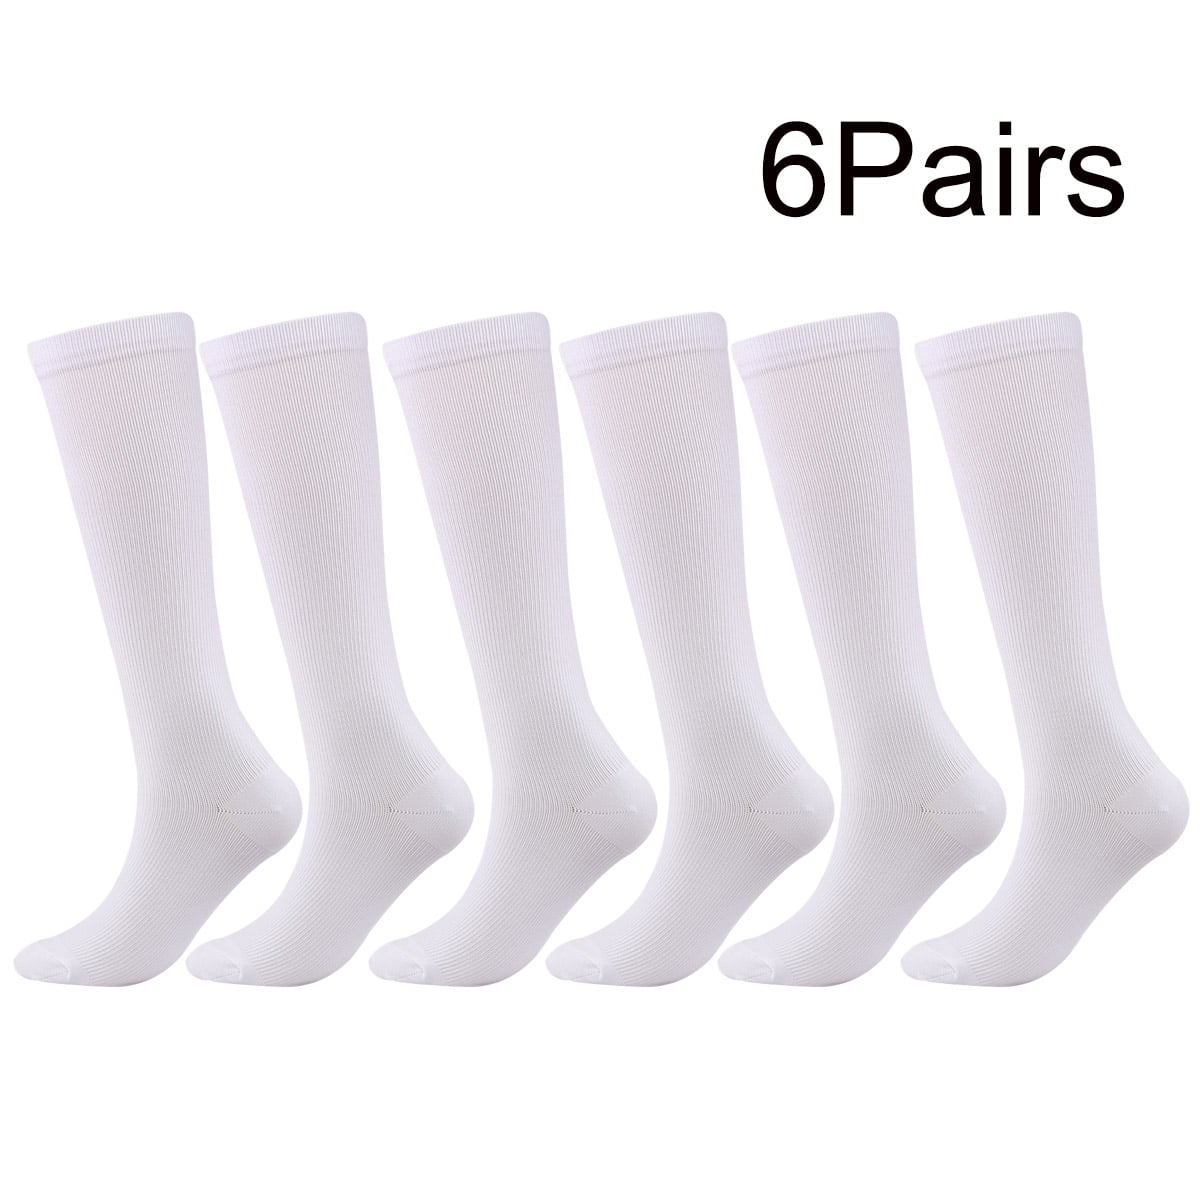 Dropship Compression Socks For Women & Men Circulation 6 Pairs For Athletic  Running Cycling to Sell Online at a Lower Price